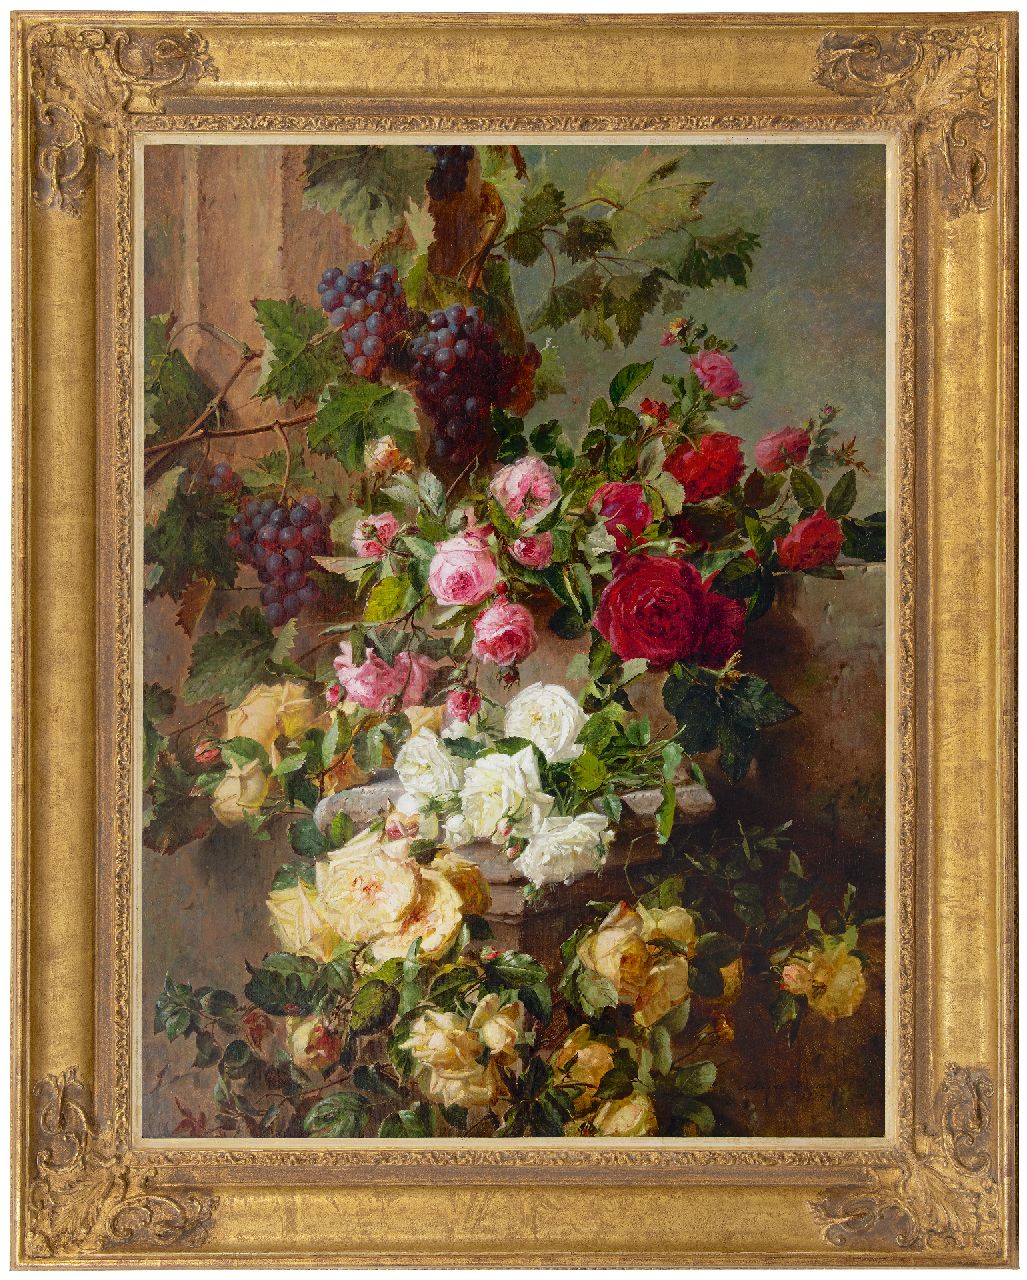 Haanen A.J.  | Adriana Johanna Haanen, Still life with roses and grapes, oil on canvas 101.6 x 76.5 cm, signed lr. and dated 1874